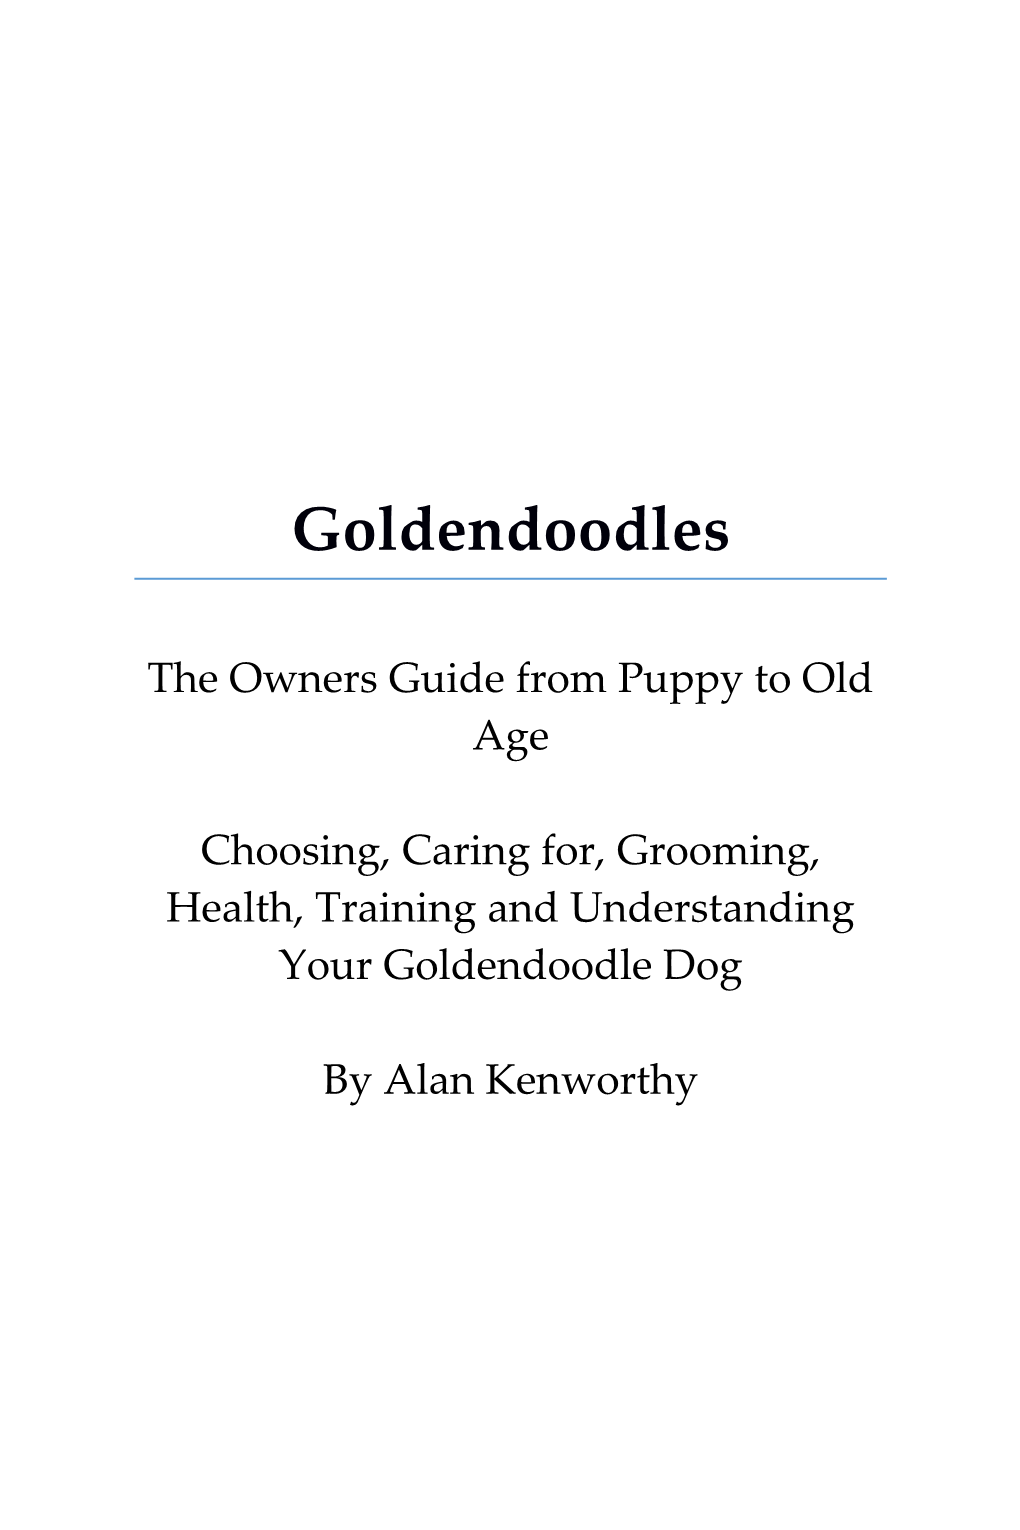 The Owners Guide from Puppy to Old Age